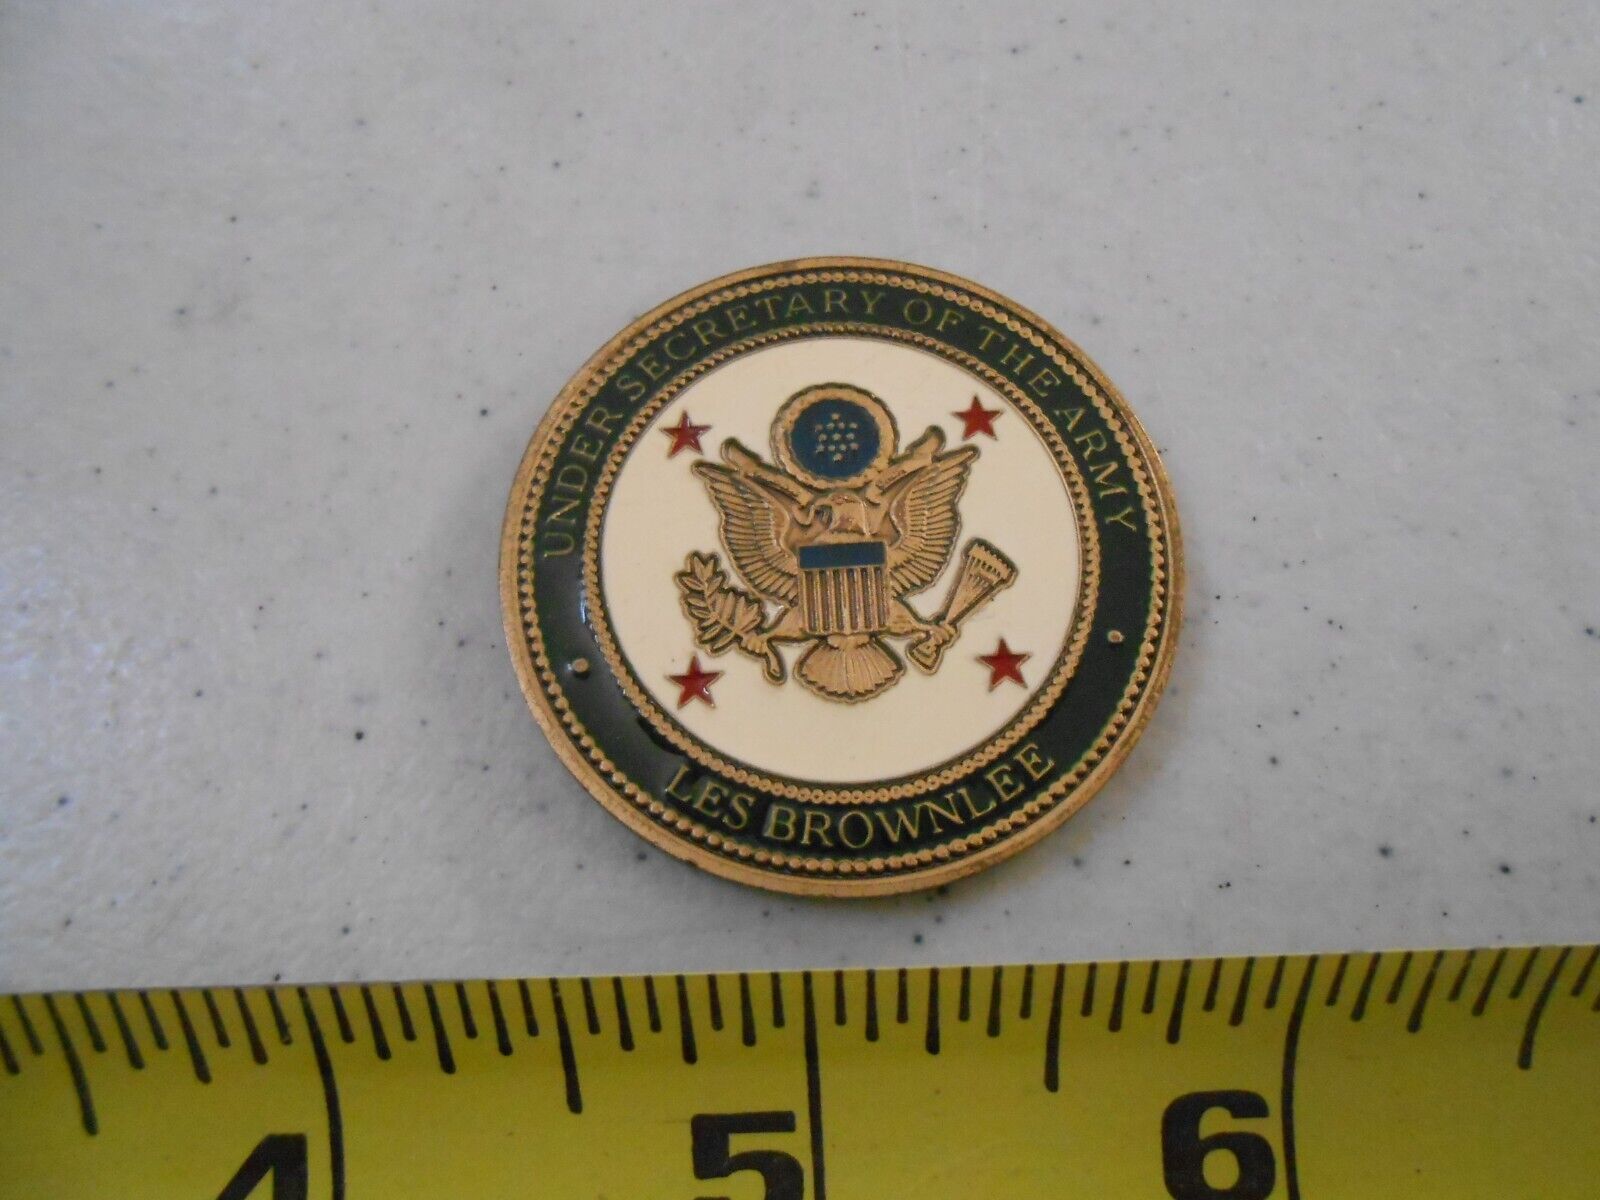 RARE LES BROWNLEE UNDER SECRETARY OF THE ARMY MILITARY CHALLENGE COIN DOA